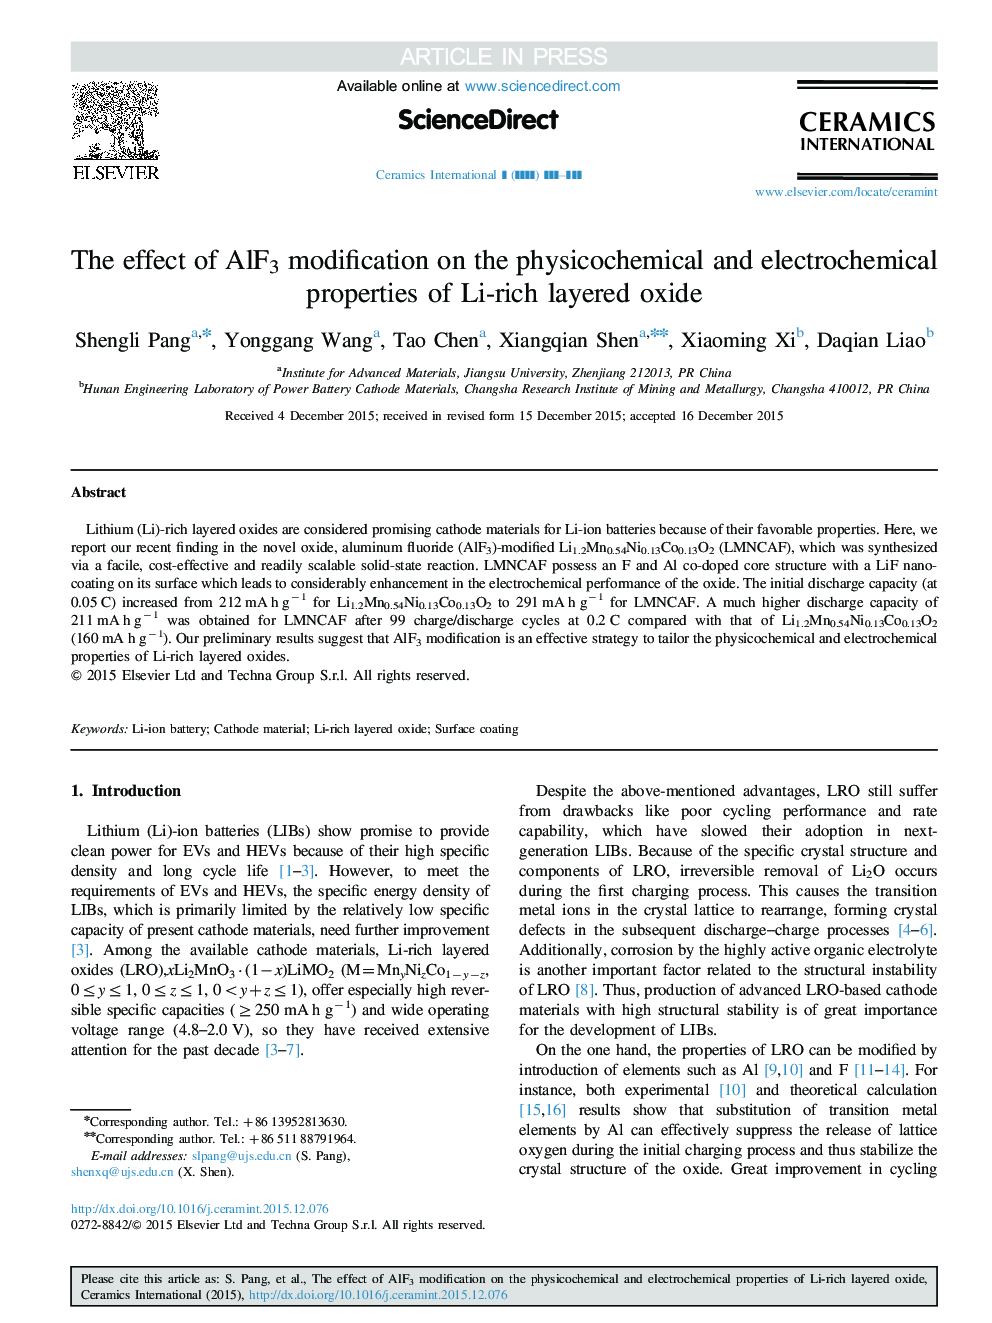 The effect of AlF3 modification on the physicochemical and electrochemical properties of Li-rich layered oxide